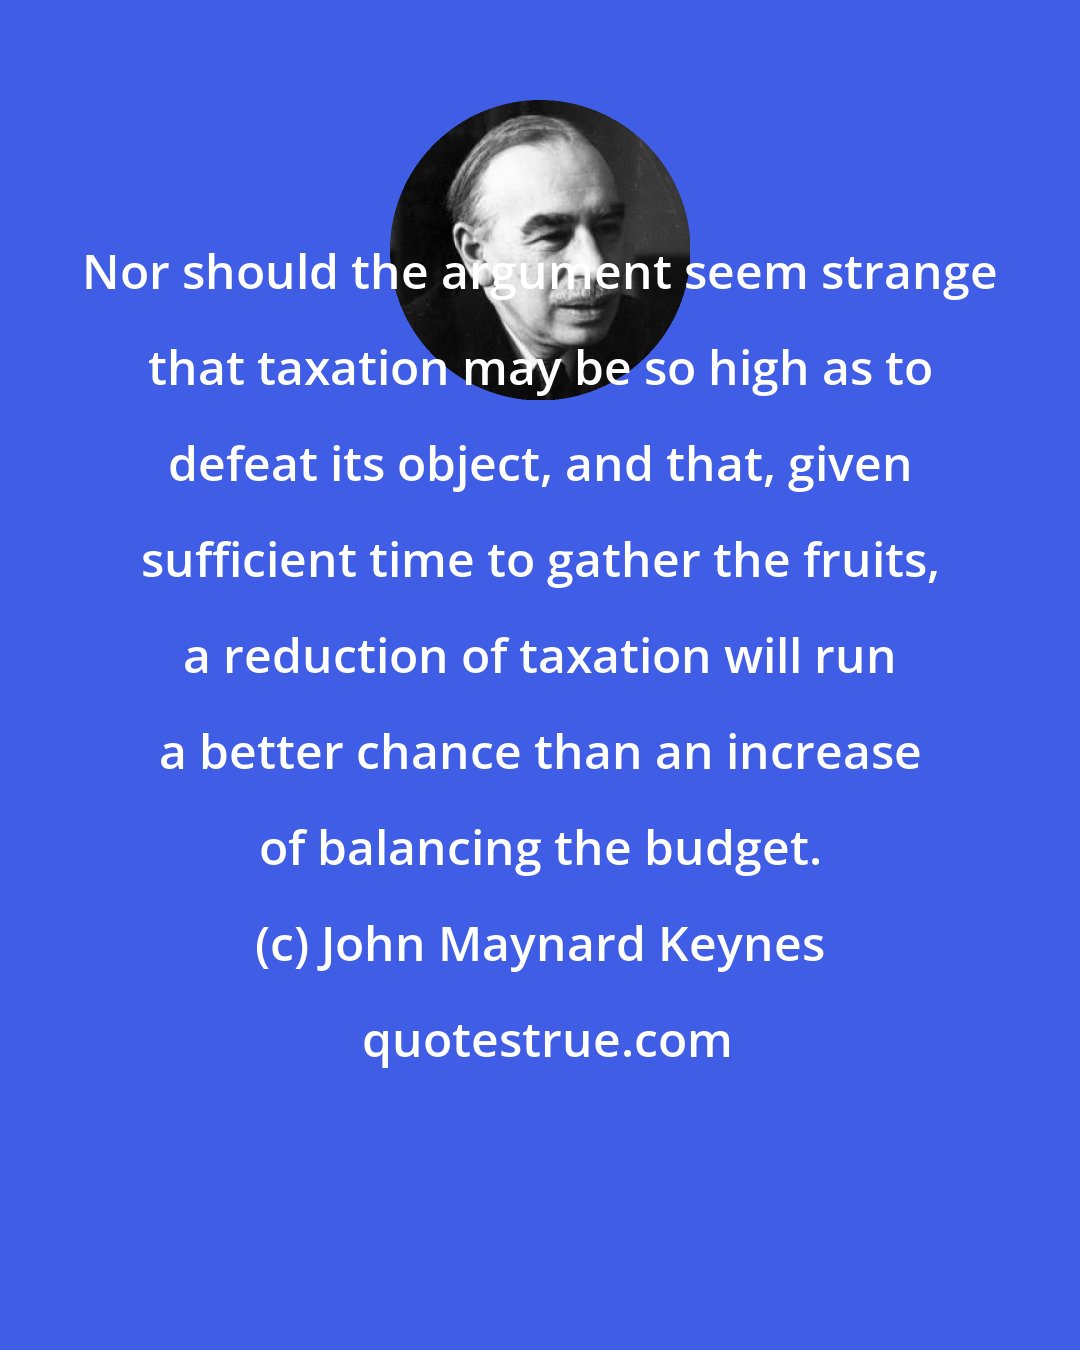 John Maynard Keynes: Nor should the argument seem strange that taxation may be so high as to defeat its object, and that, given sufficient time to gather the fruits, a reduction of taxation will run a better chance than an increase of balancing the budget.